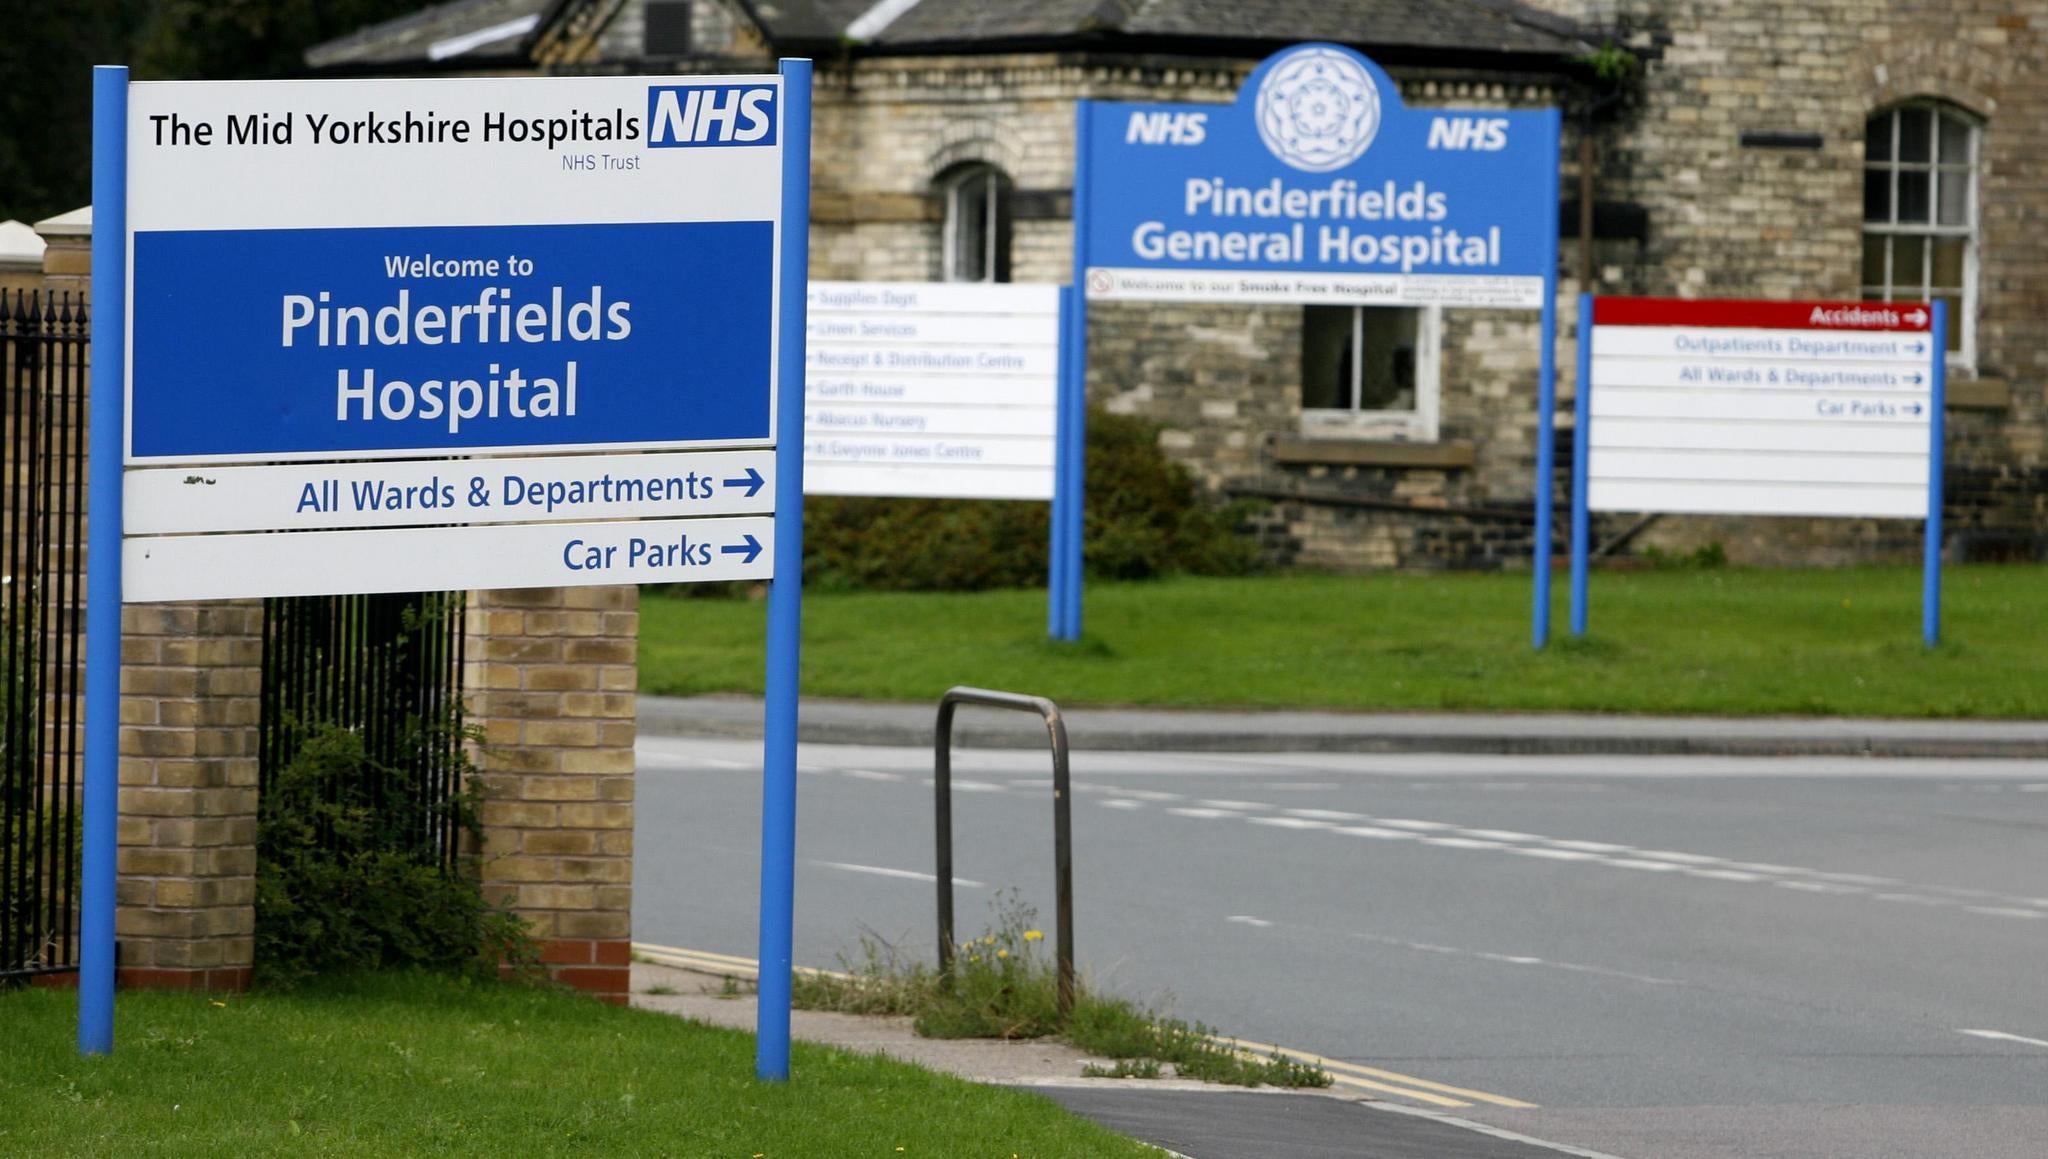 Pinderfields Hospital in Yorkshire is seeing long waits for patients due to a shortage of beds